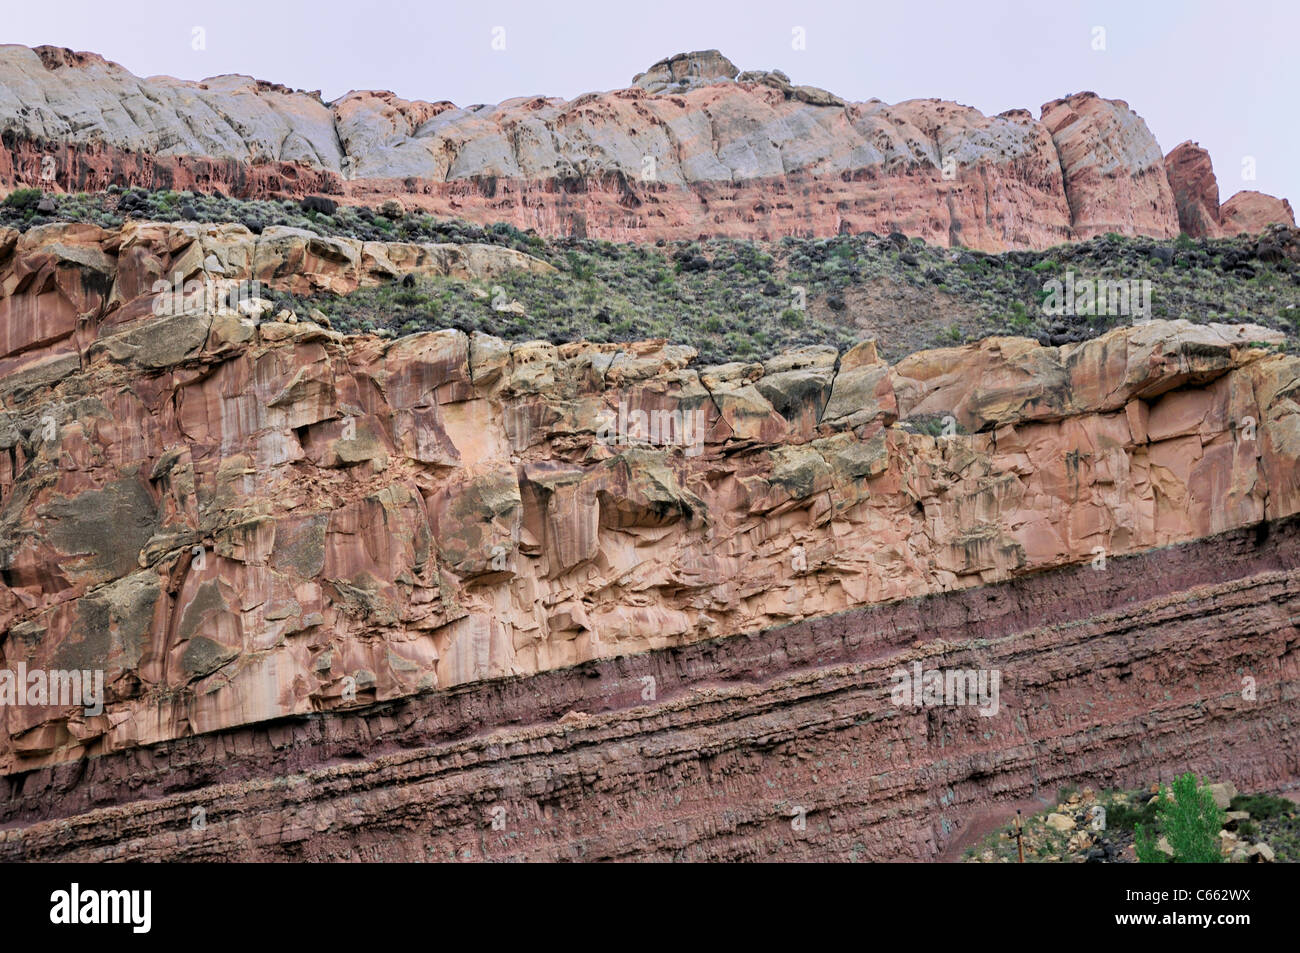 Multicolored sedimentary rock layers are evident in the colorful cliffs of Capitol Reef National Park Stock Photo